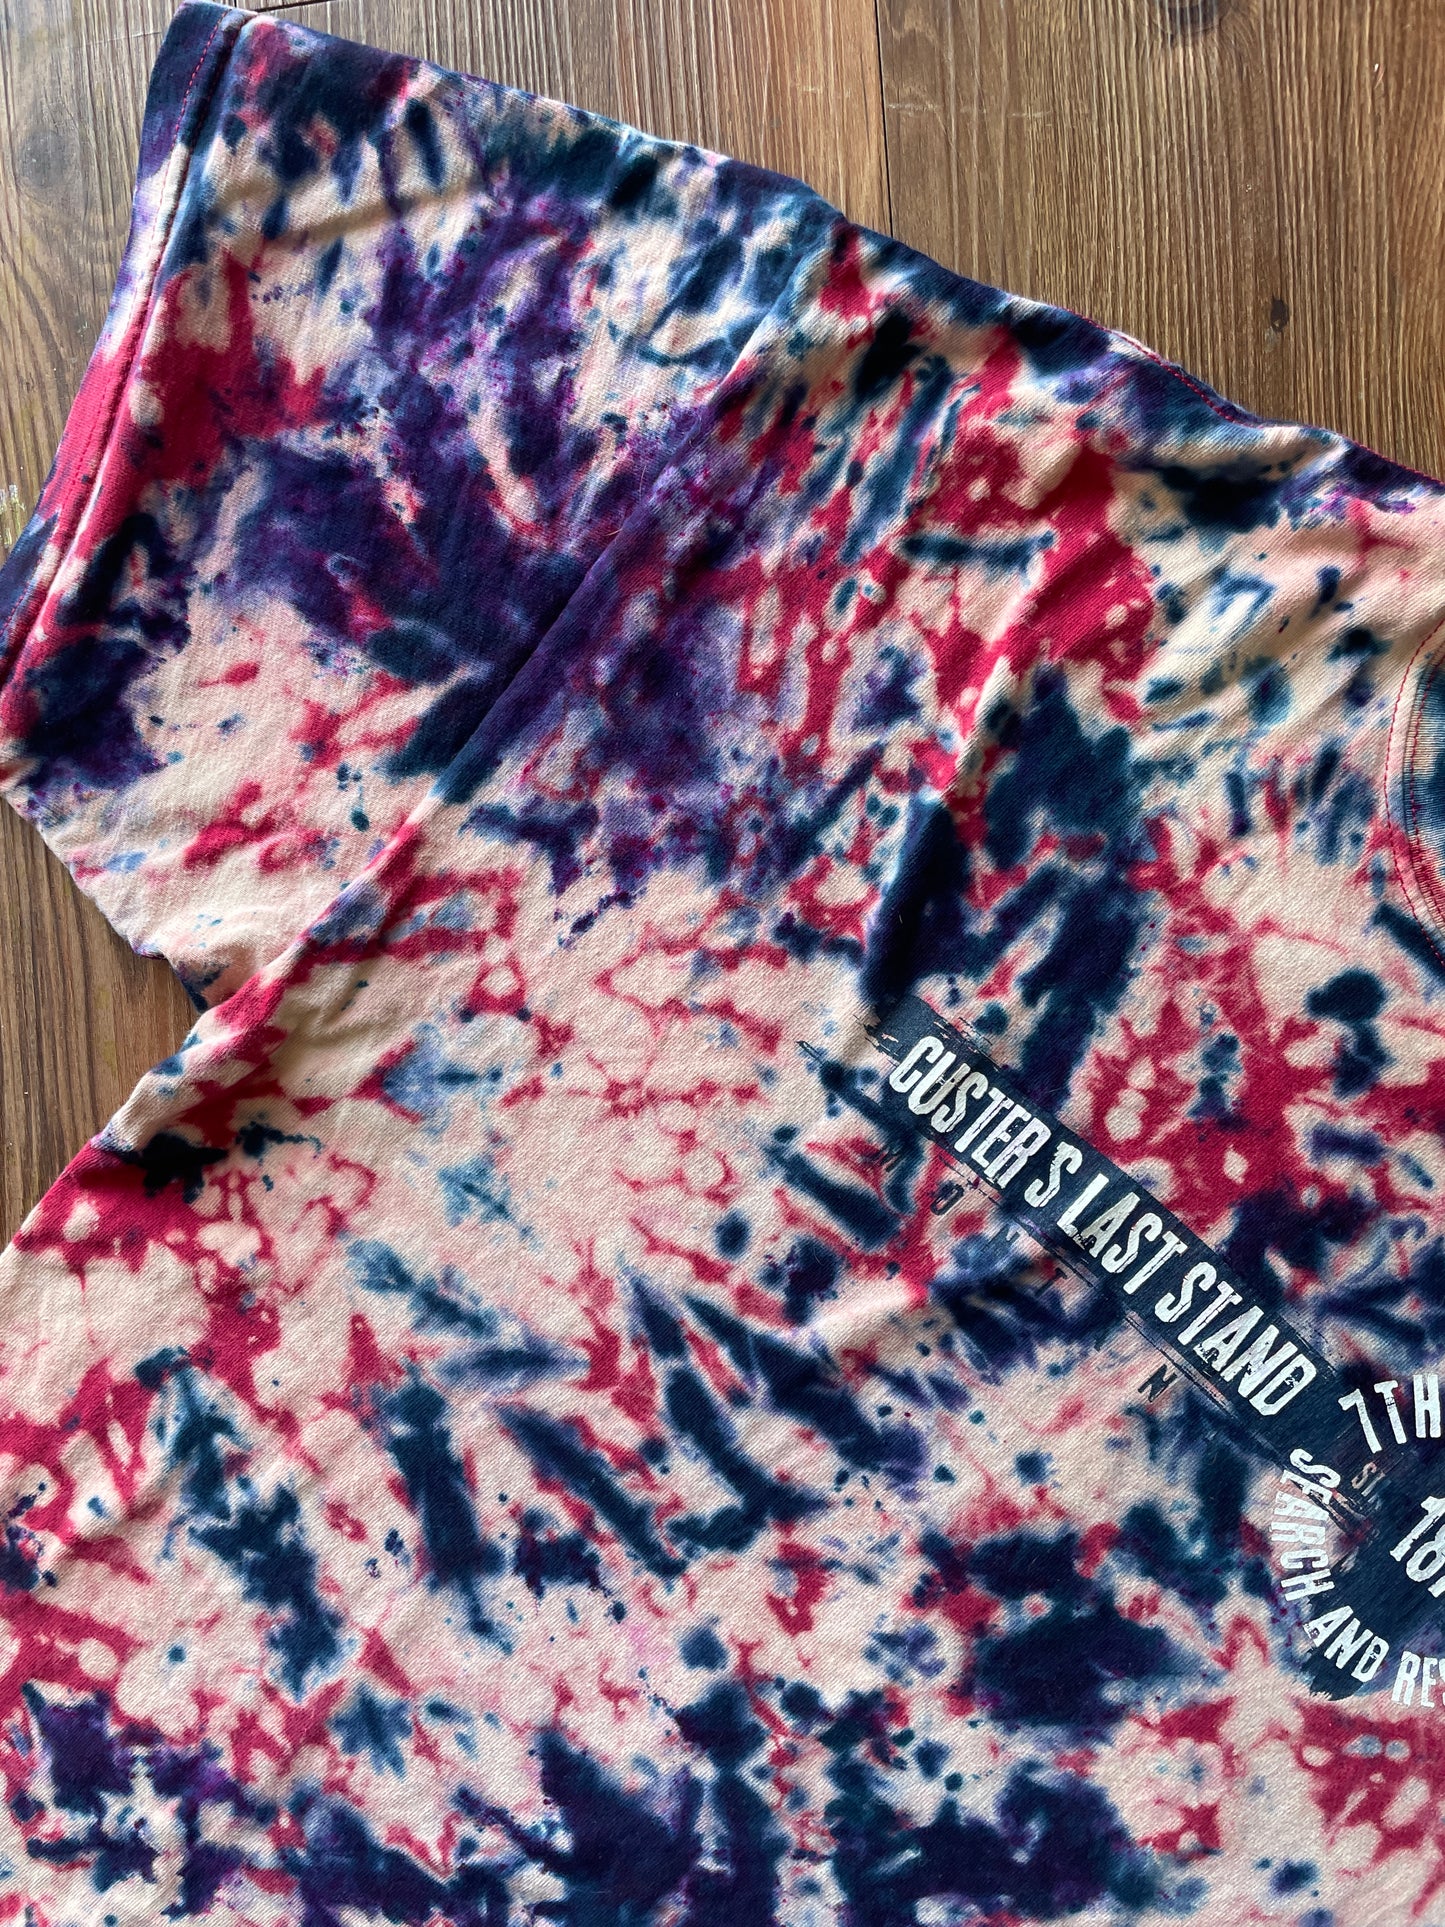 XL Men’s Custer's Last Stand Handmade Reverse Tie Dye T-Shirt | One-Of-a-Kind Red, White, and Blue Bleach Dyed Short Sleeve